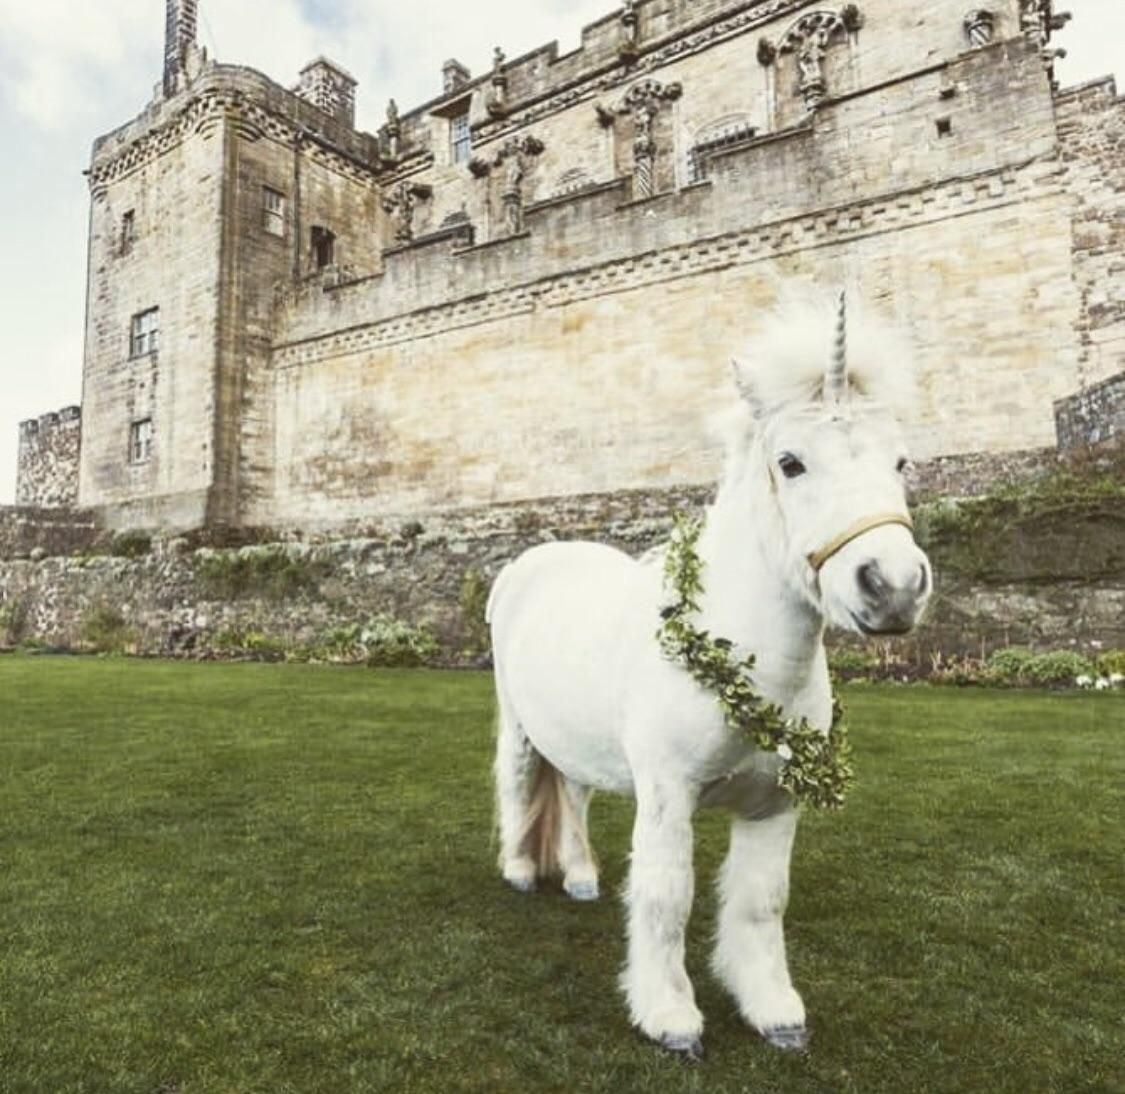 Just the national symbol of Scotland chilling outside a Scottish castle, nothing to see here.